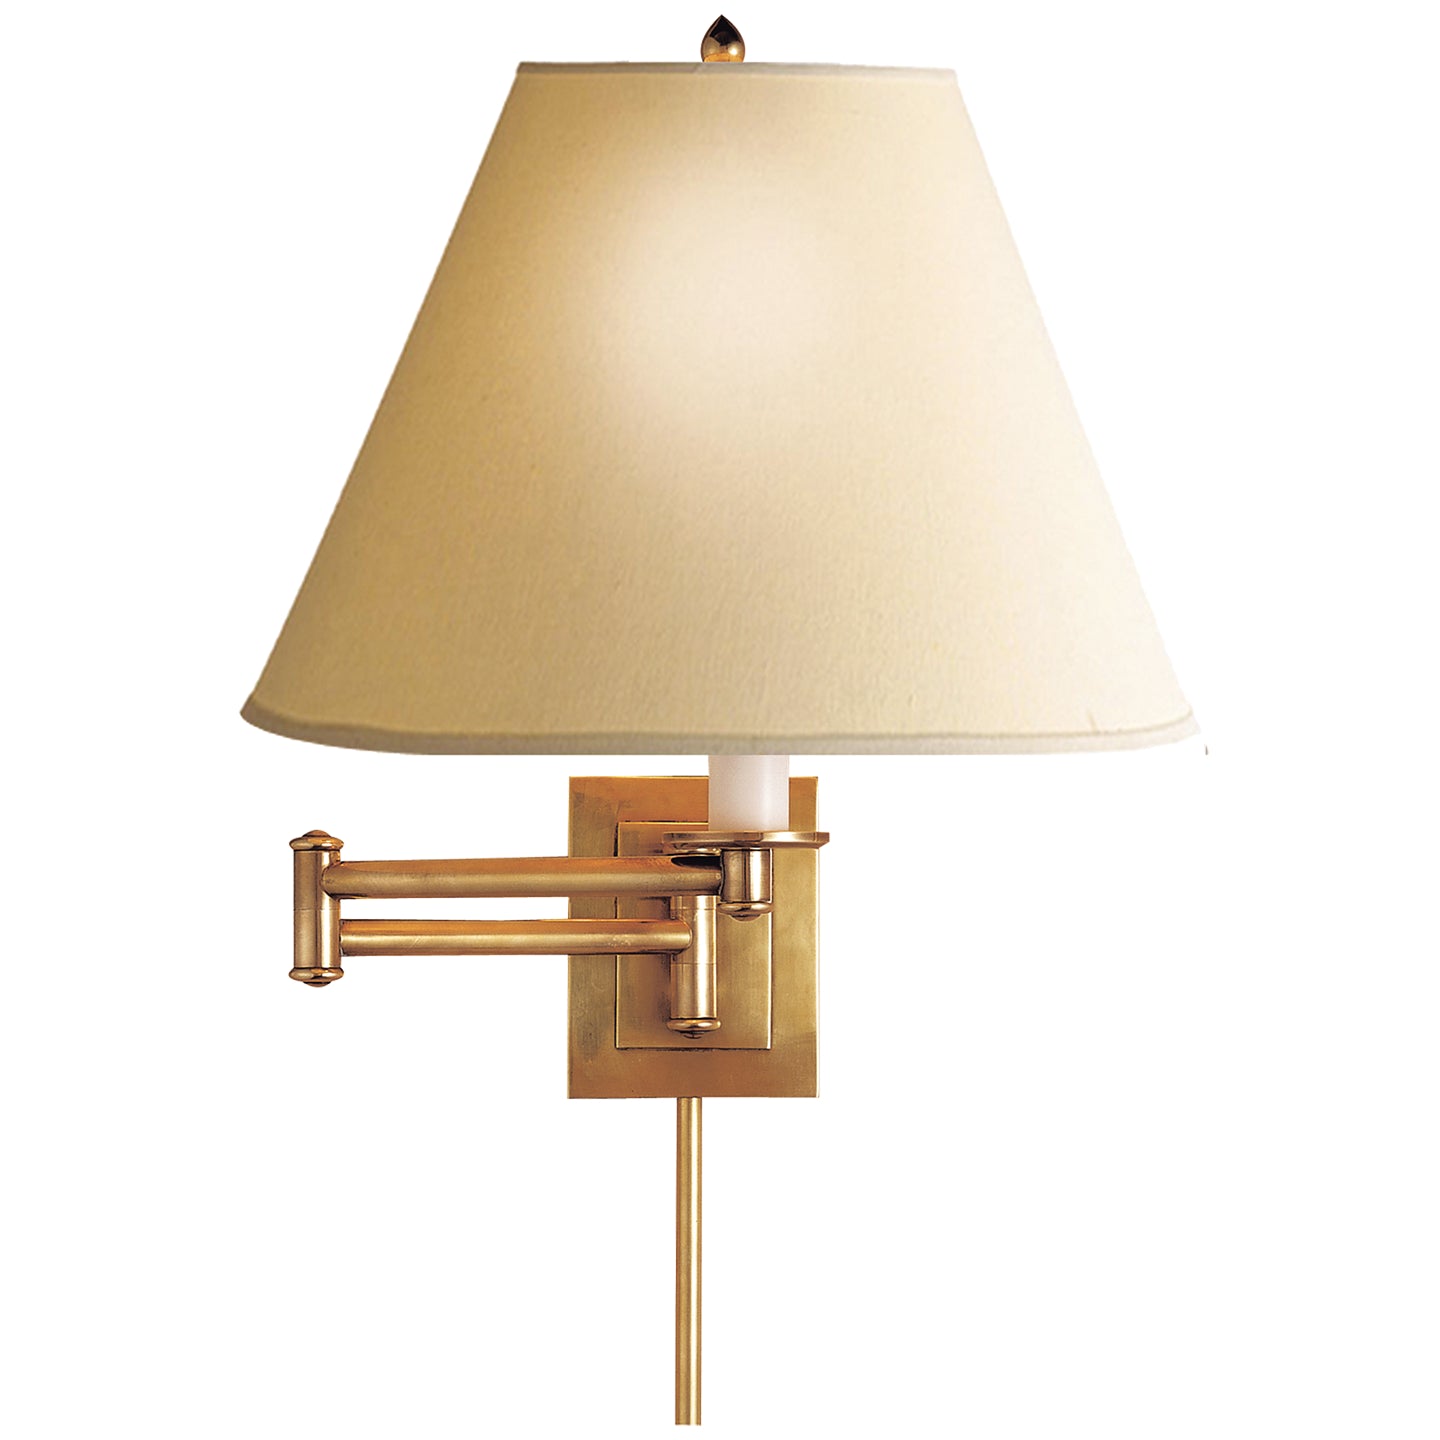 Visual Comfort Signature - S 2500HAB-L - One Light Swing Arm Wall Lamp - Primitive - Hand-Rubbed Antique Brass